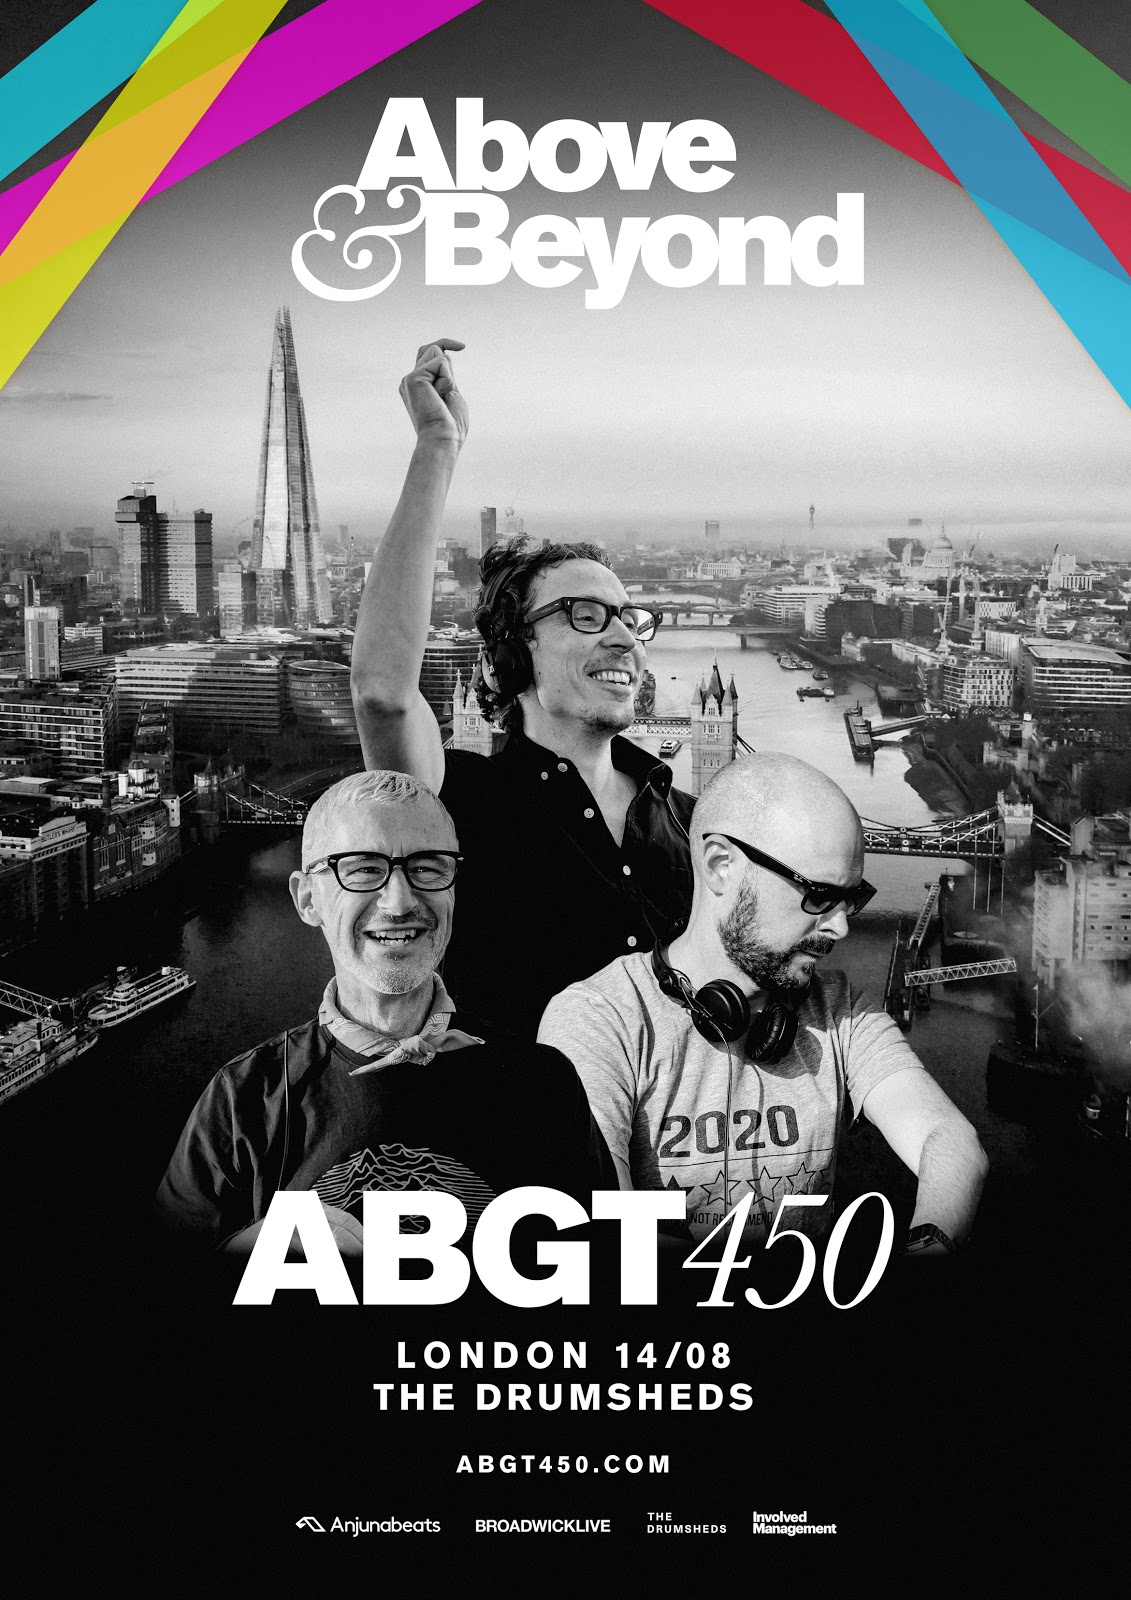 Above and Beyond presents Group Therapy 450 at The Drumsheds, Meridian Water, London, UK on 14th and 15th of August 2021